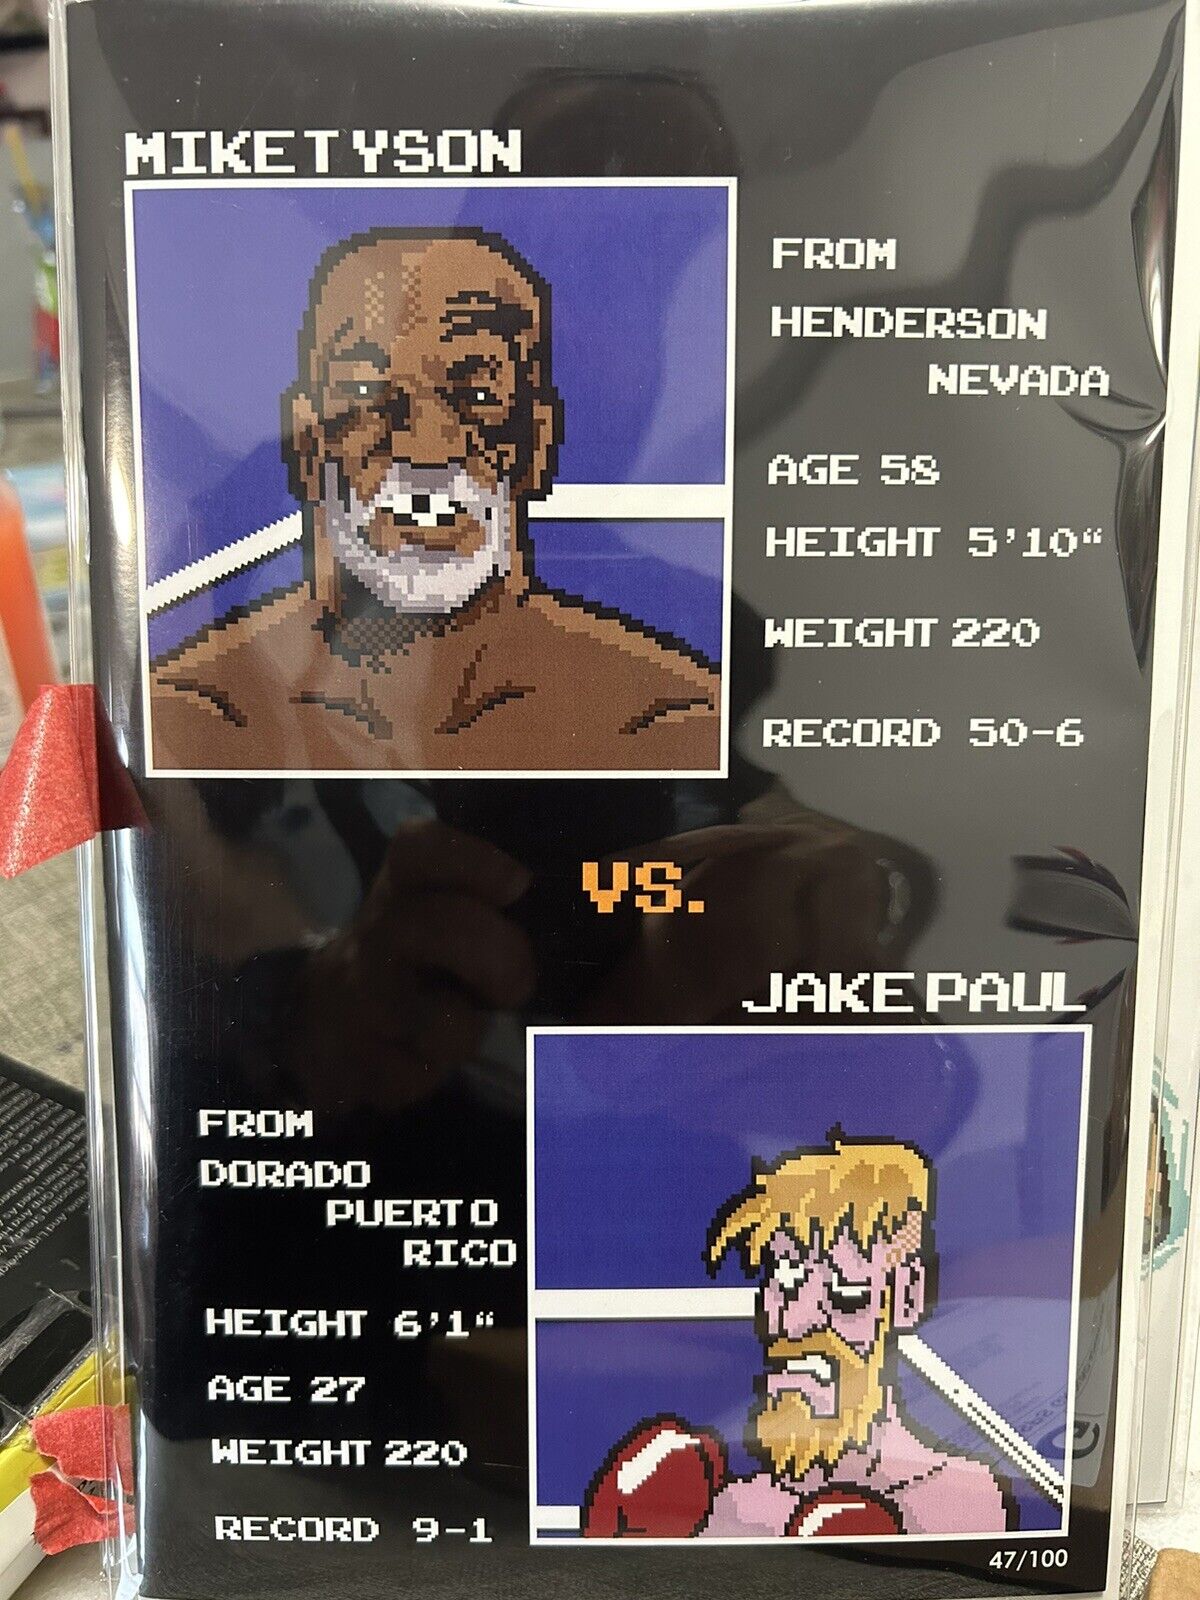 Fame: OLD Mike Tyson 1 Punch Out Round 2 Variant Limited 47/100